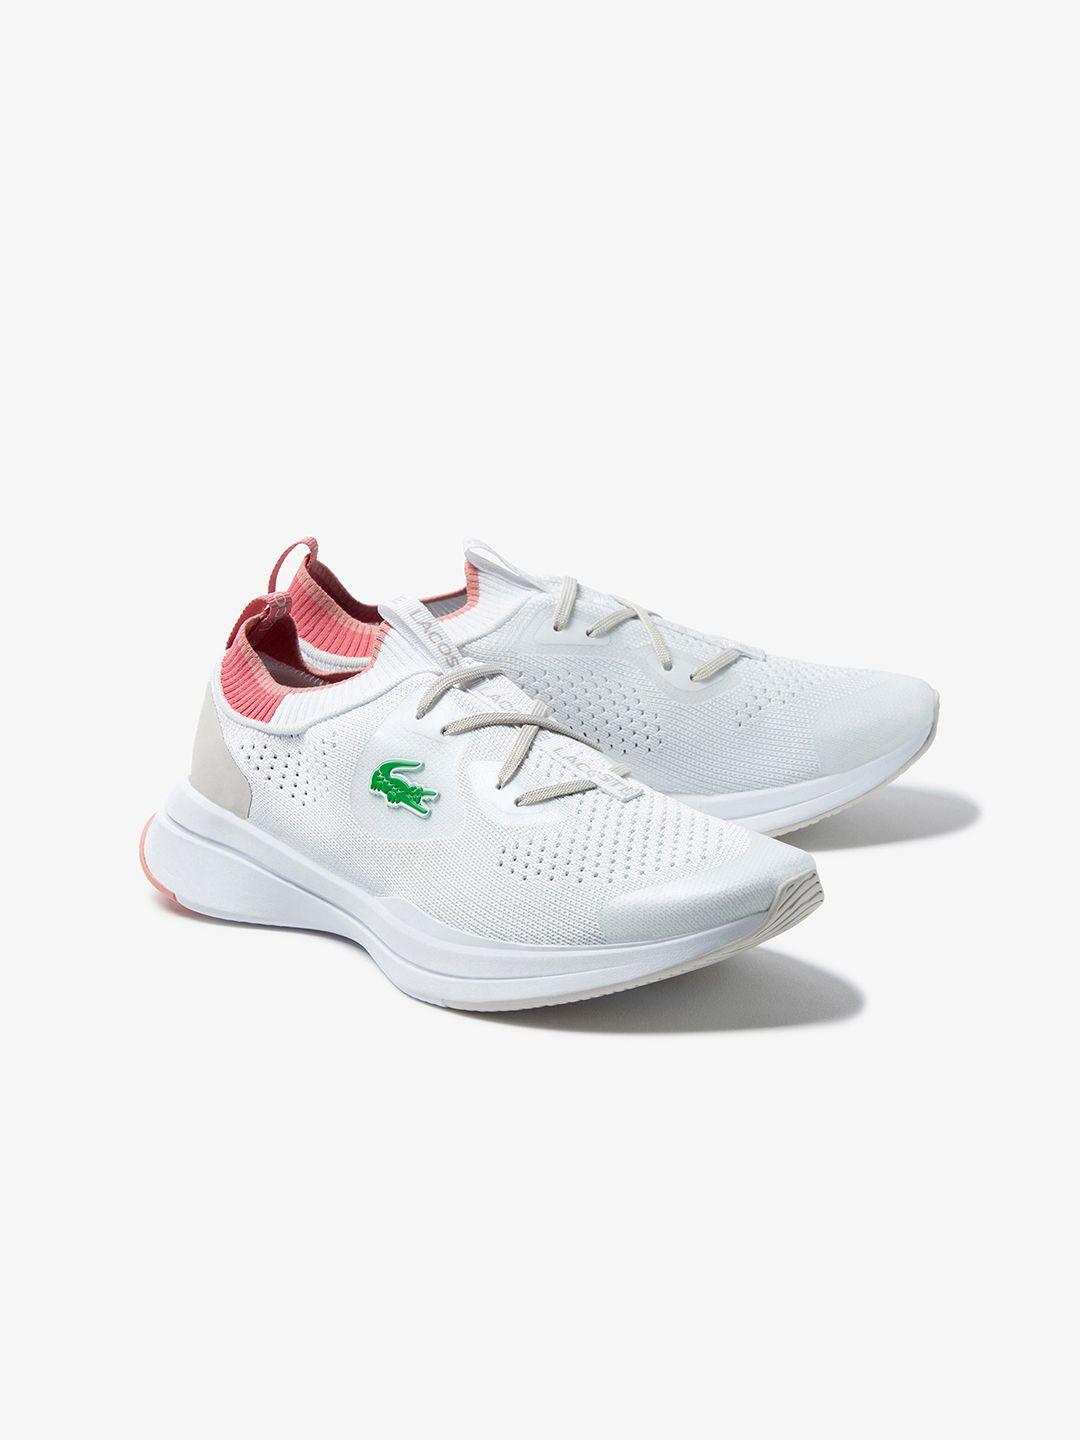 lacoste women run spin knit textile sneakers